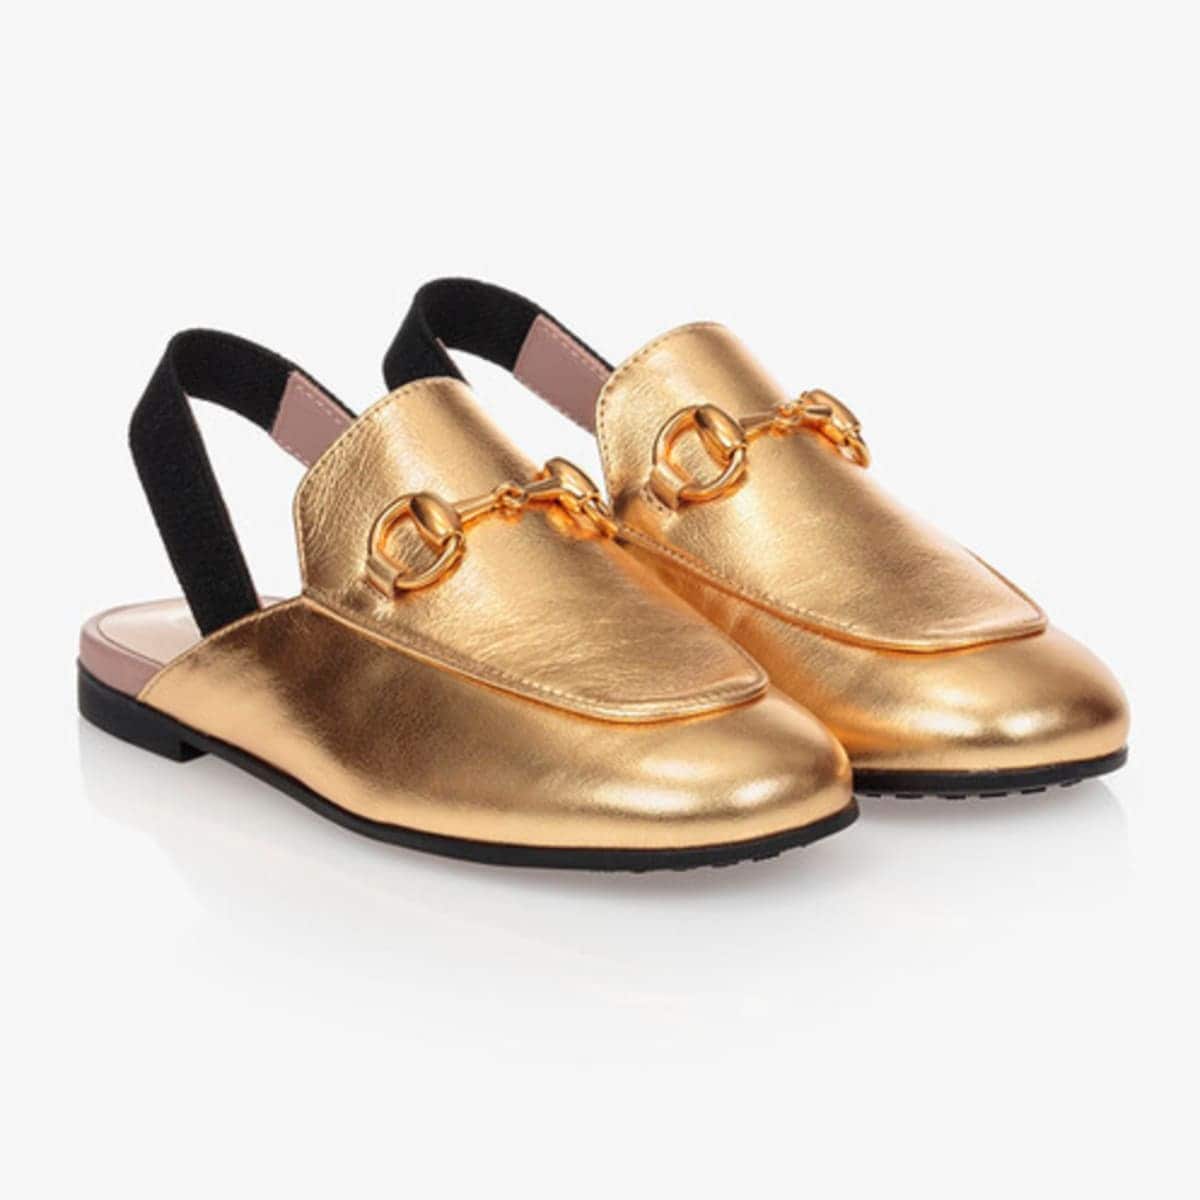 Gucci Princetown gold loafers slippers worn by Penelope Disick